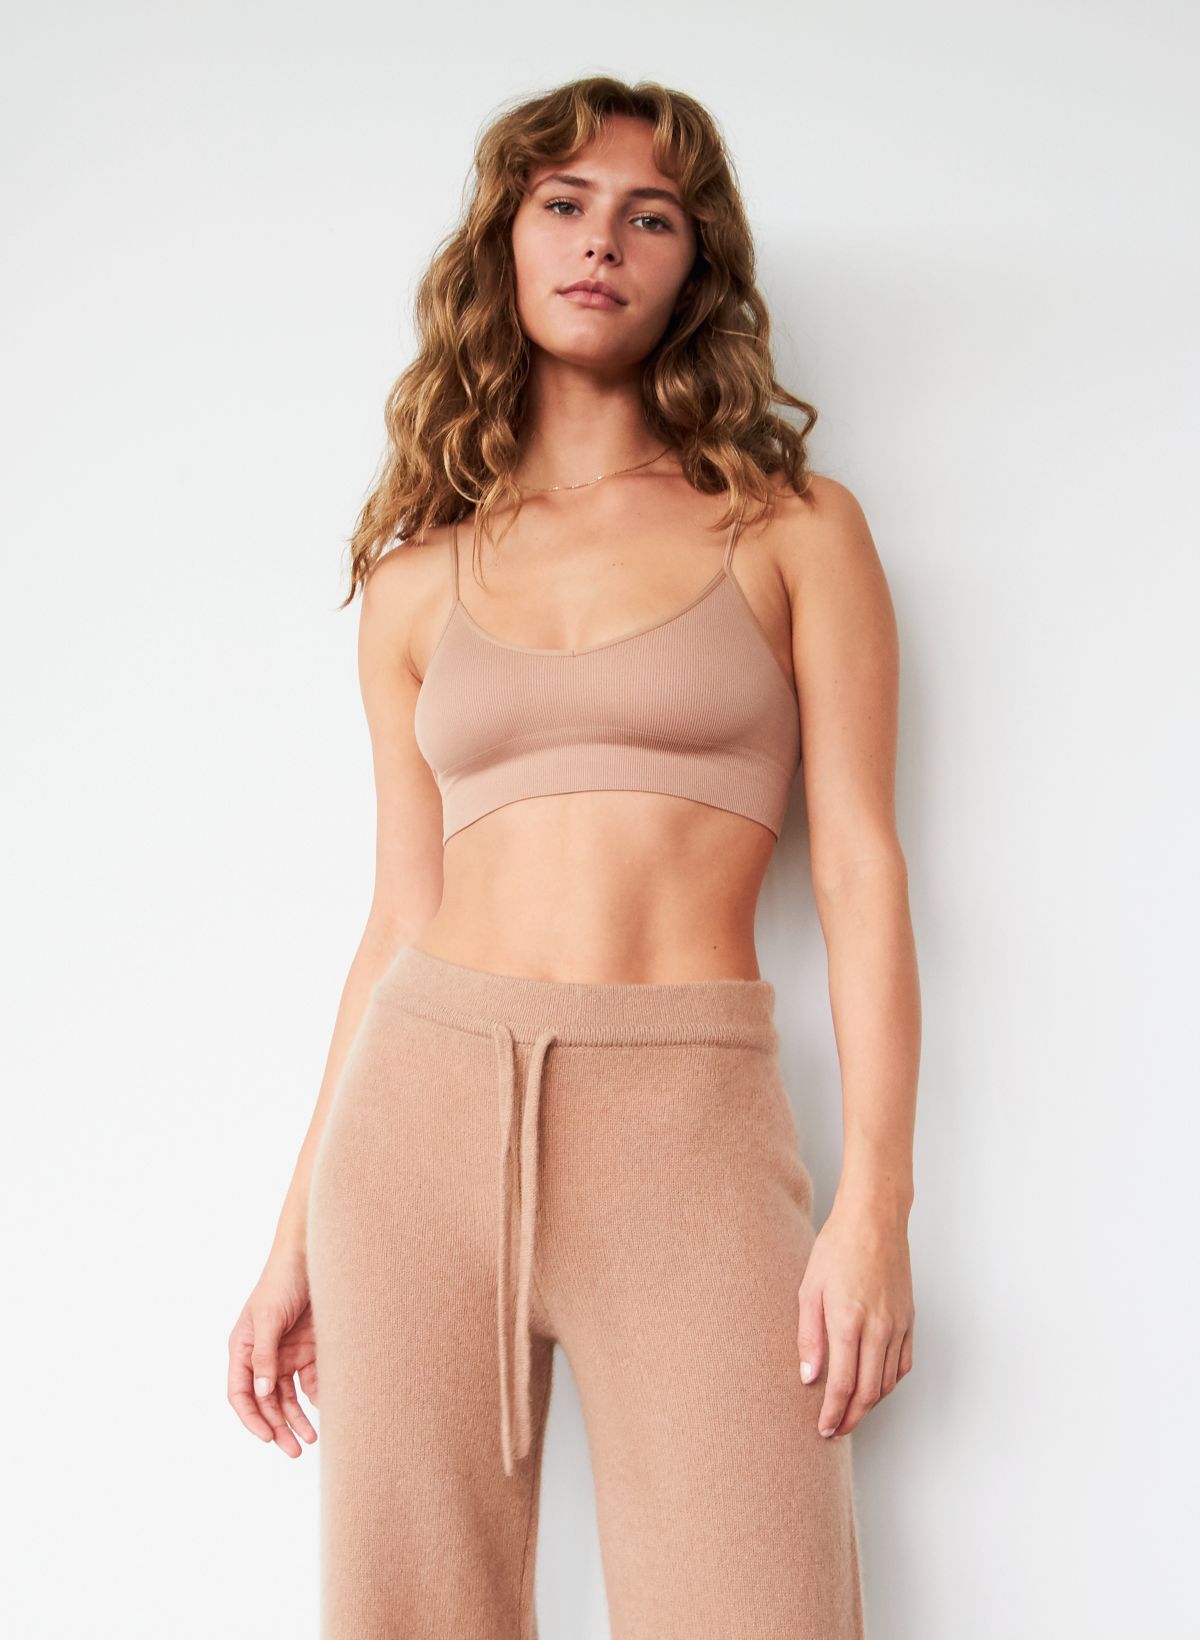 A mildly unnecessary cashmere bralette : r/knitting